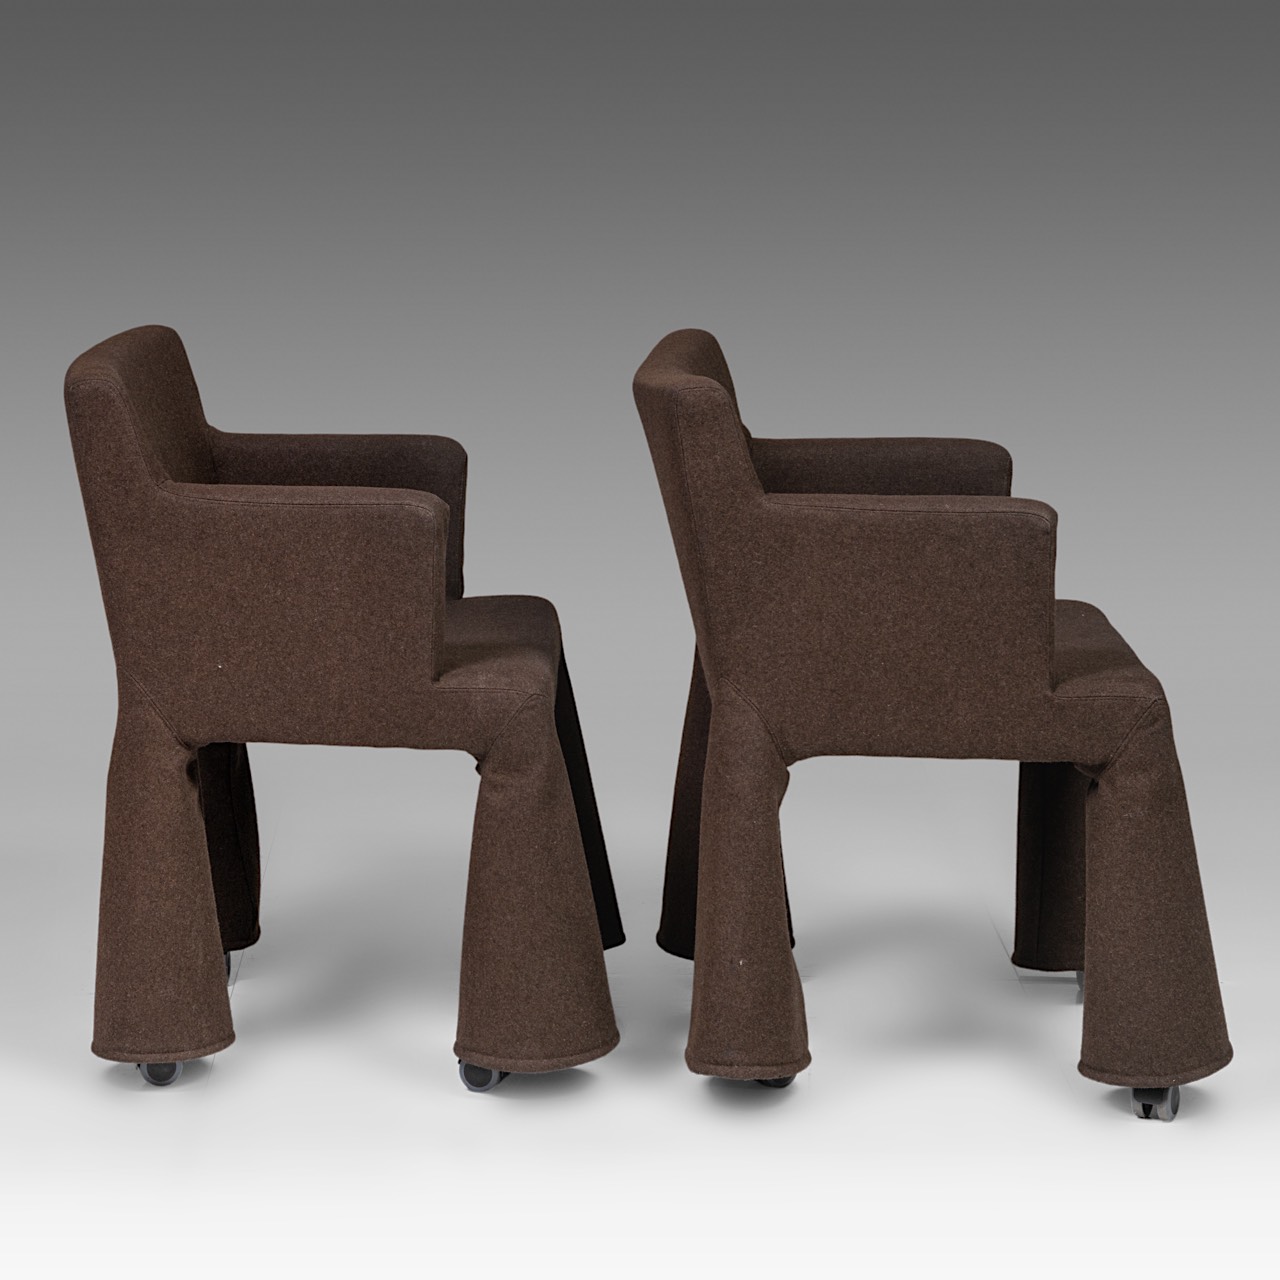 A pair of 'VIP' chairs by Marcel Wanders, the Netherlands, 2000, H 82 - W 60 cm - Image 6 of 9